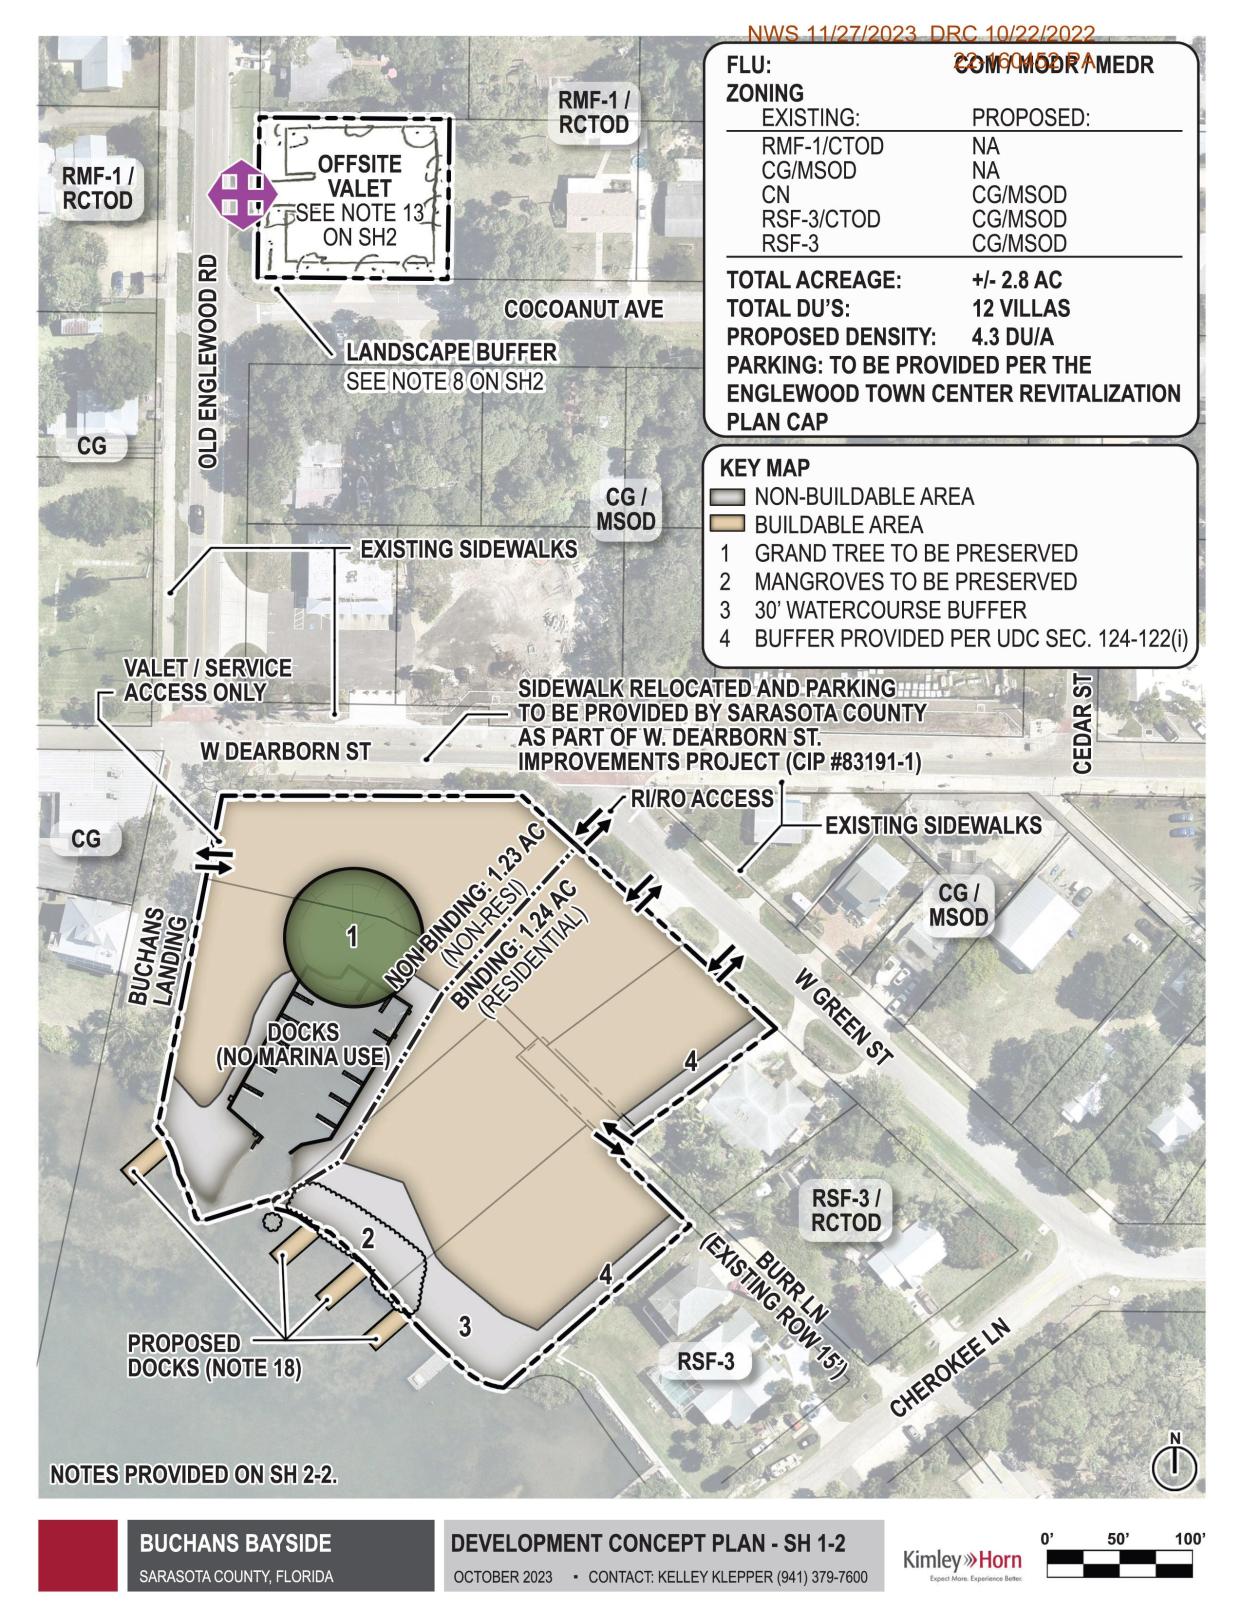 The map shows a non-binding site plan for the proposed mixed-use development Buchans Bayside, which will include a destination restaurant and 12 paired villas.